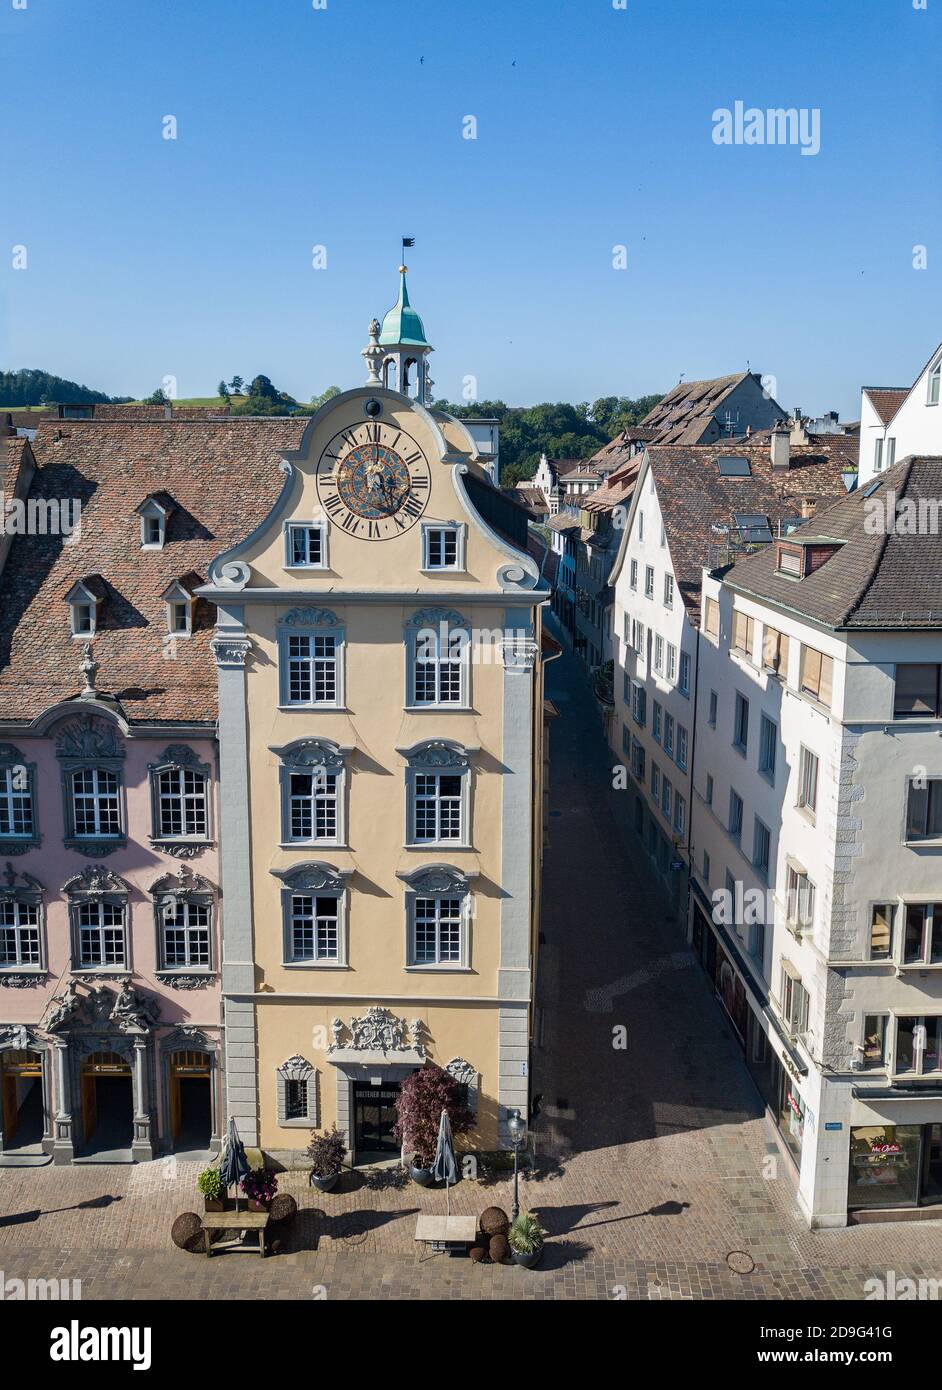 Schaffhausen, Switzerland - June 30.2019: the Fronwagplatz Square of the old Schaffhausen town center with the astronomic clock (built in 1560s) on th Stock Photo